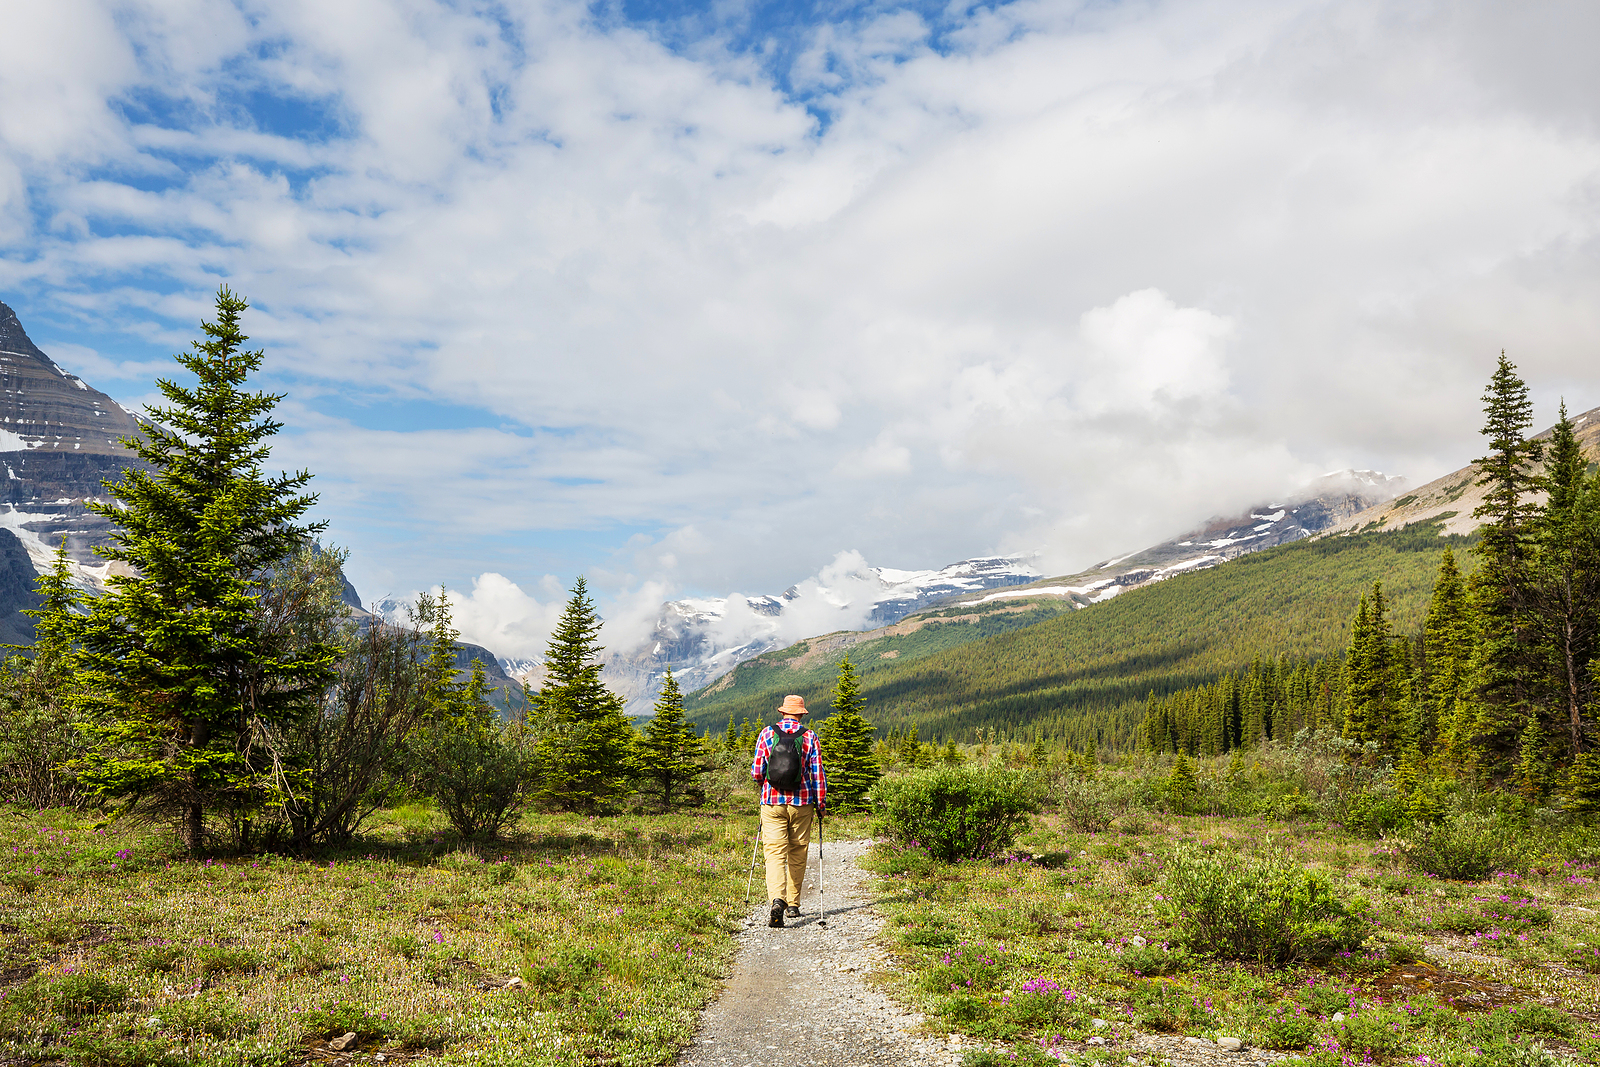 6 of The Best Hikes With No Entry Fee